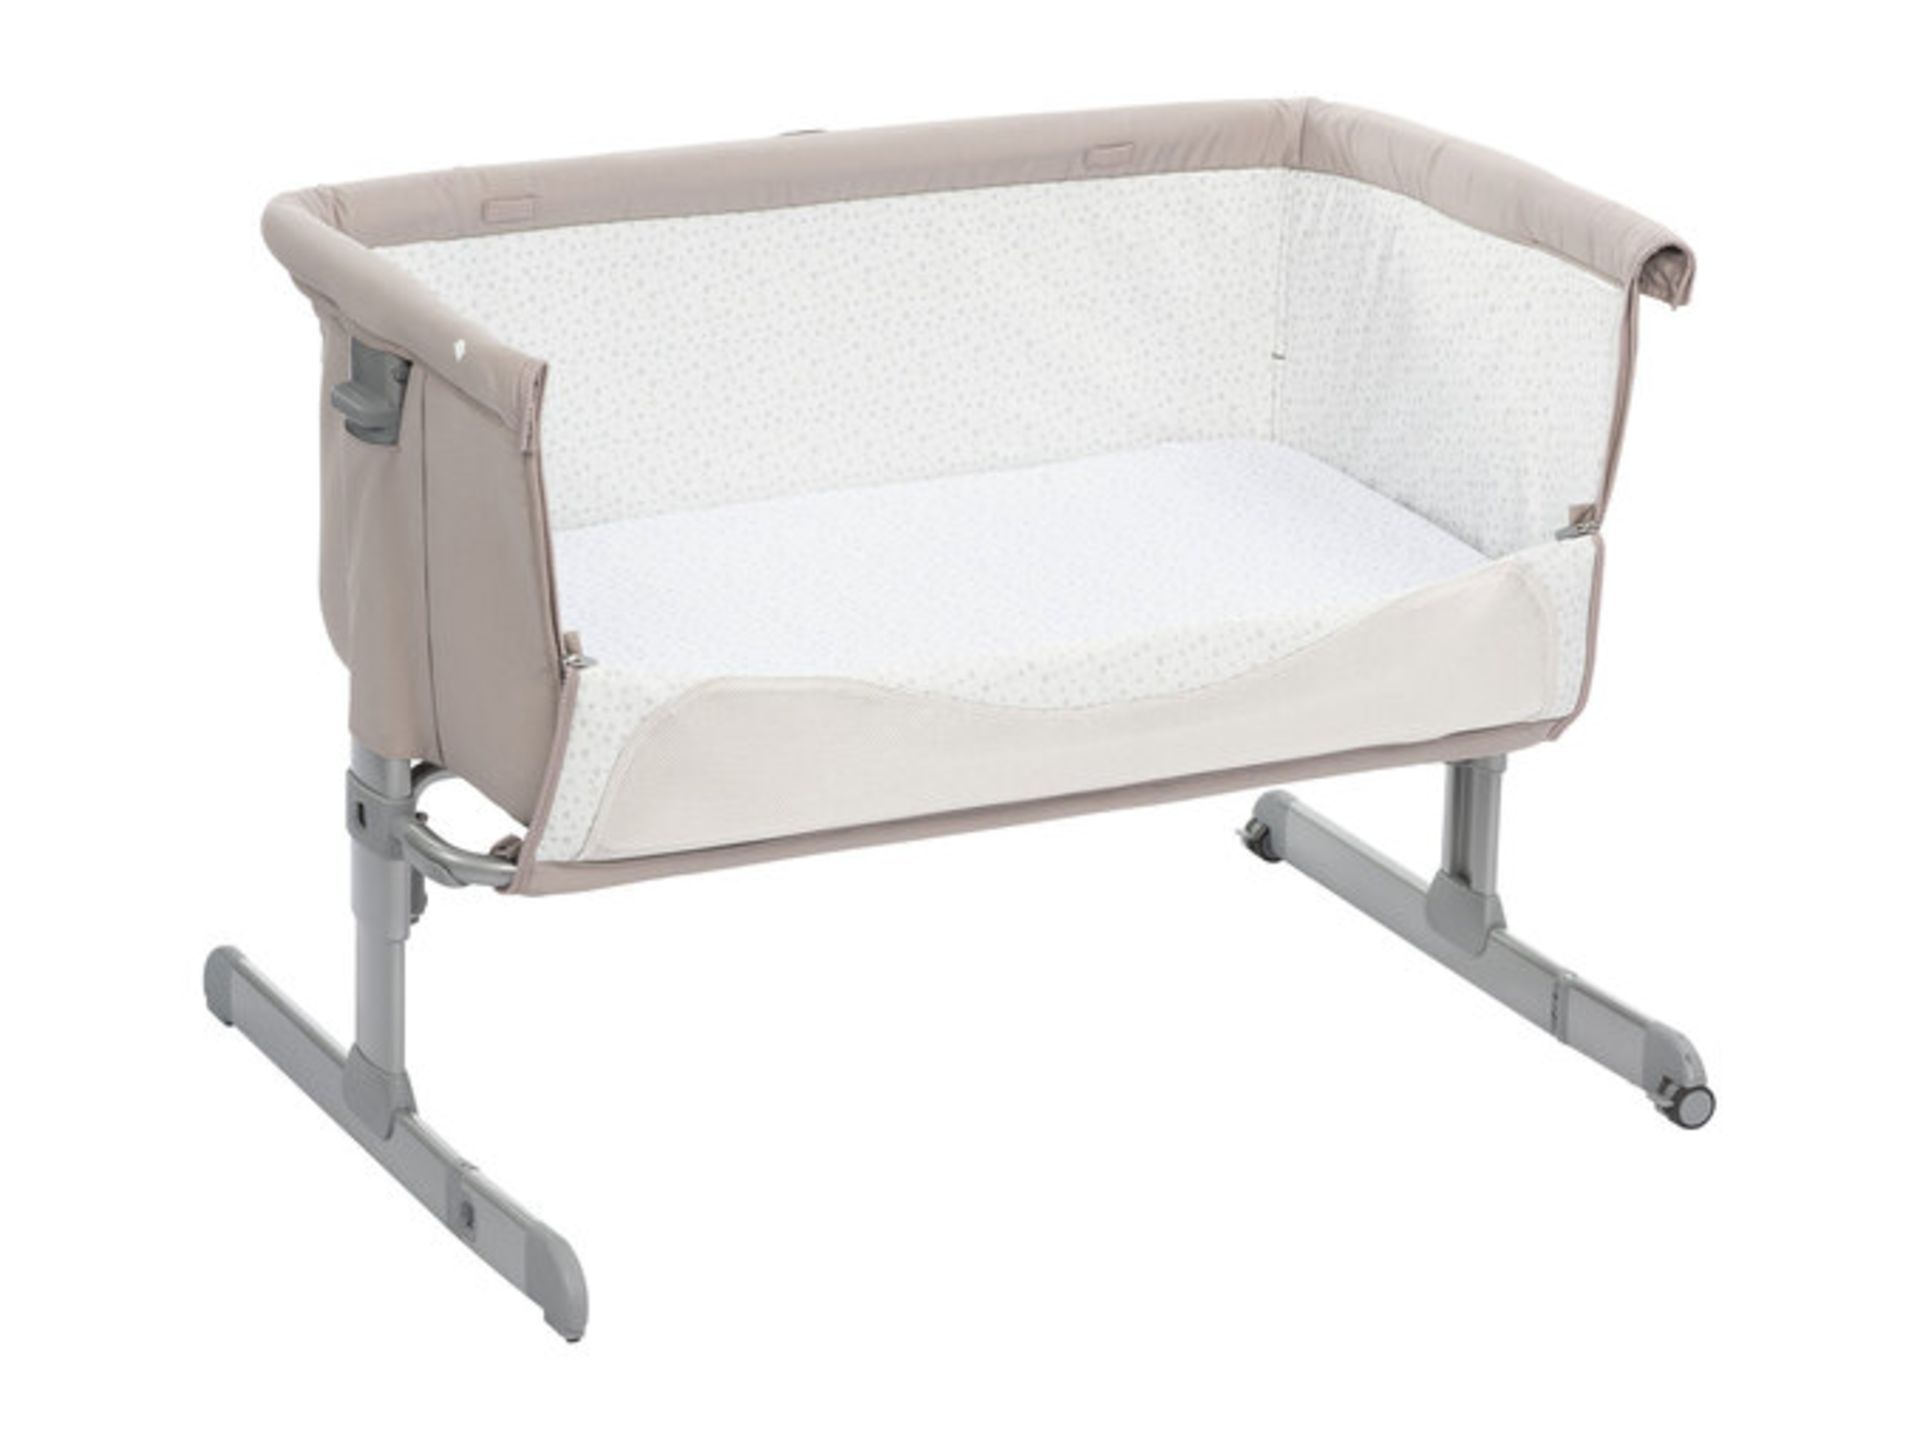 1 x CHICCO Next2me 'Chick to Chick' Bedside Baby Crib With Mattress - New Sealed Stock - RRP £299.00 - Image 3 of 8